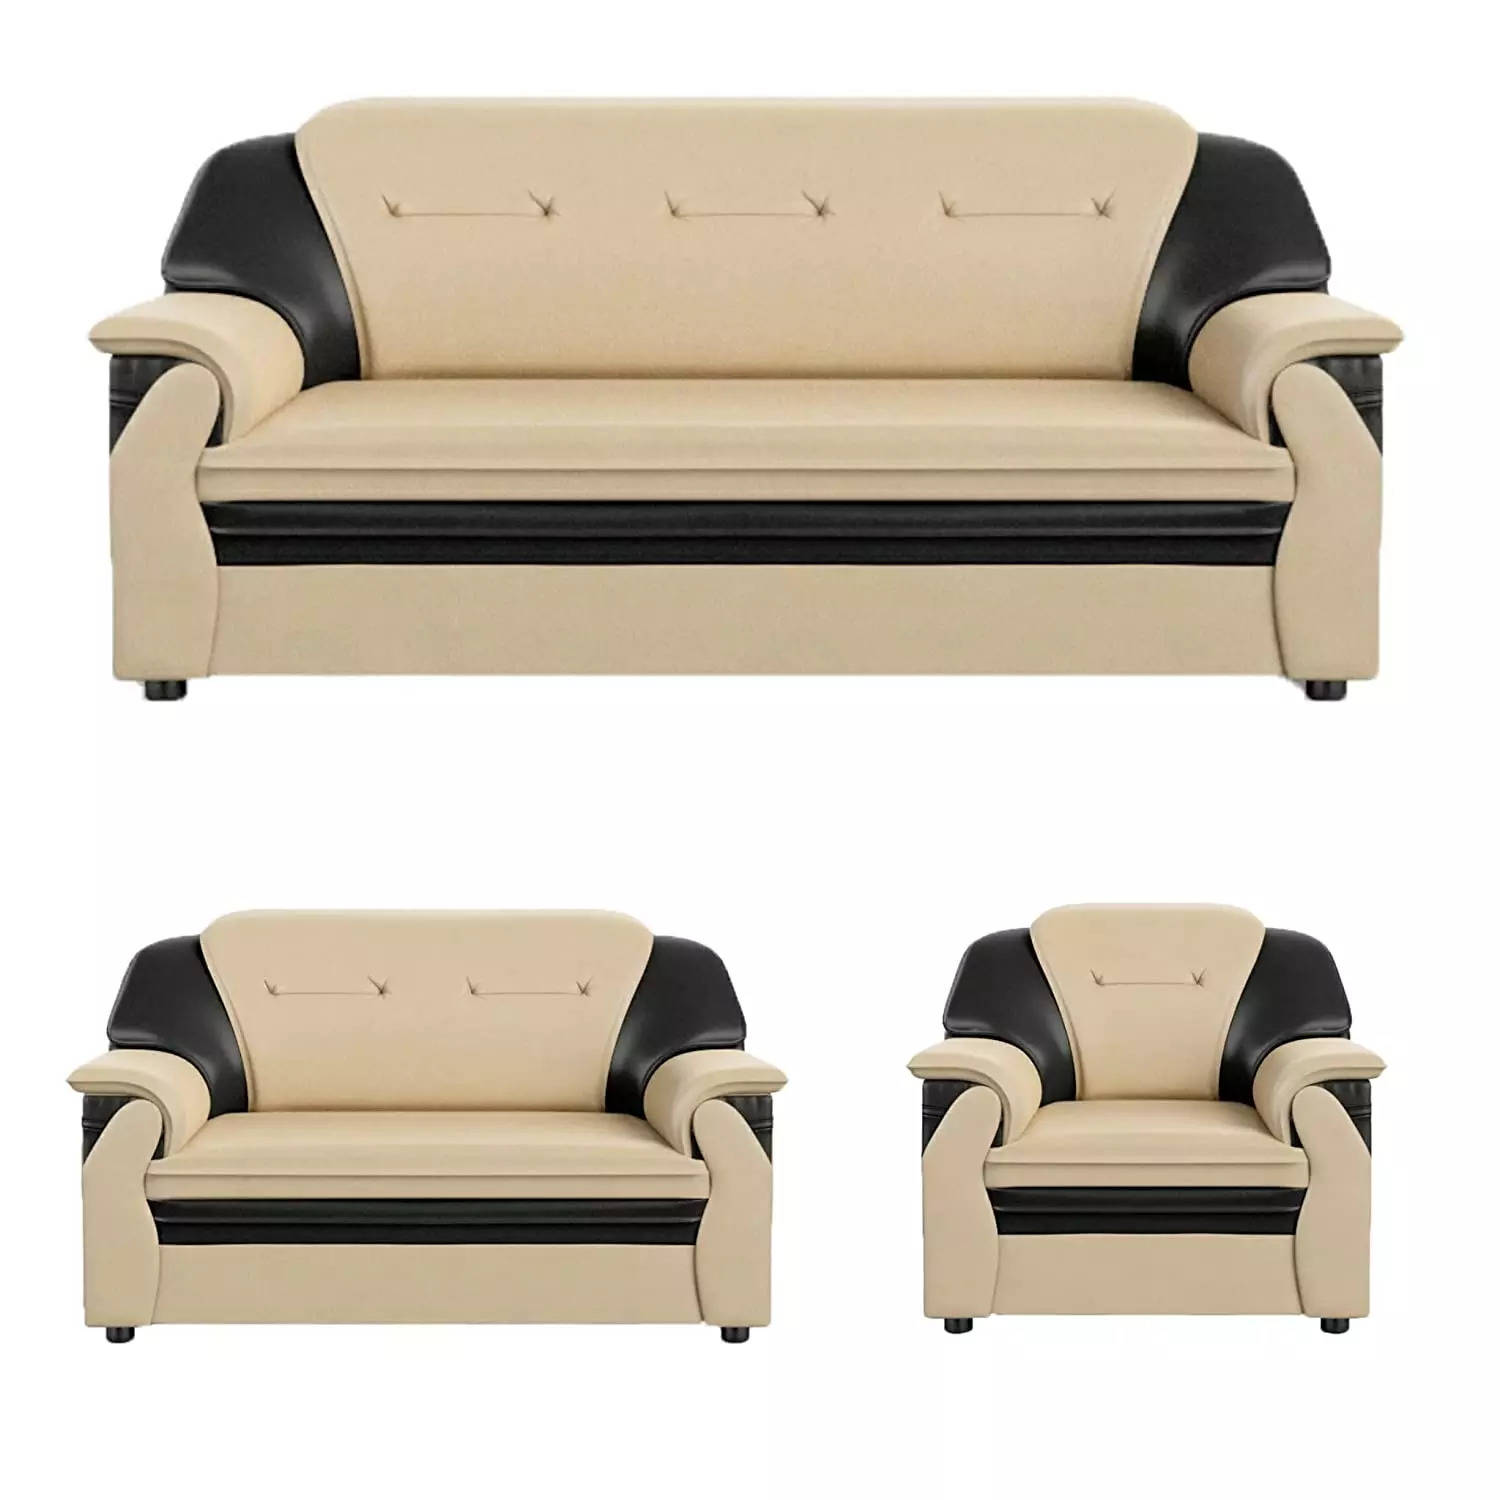 Best Sofa Sets In India